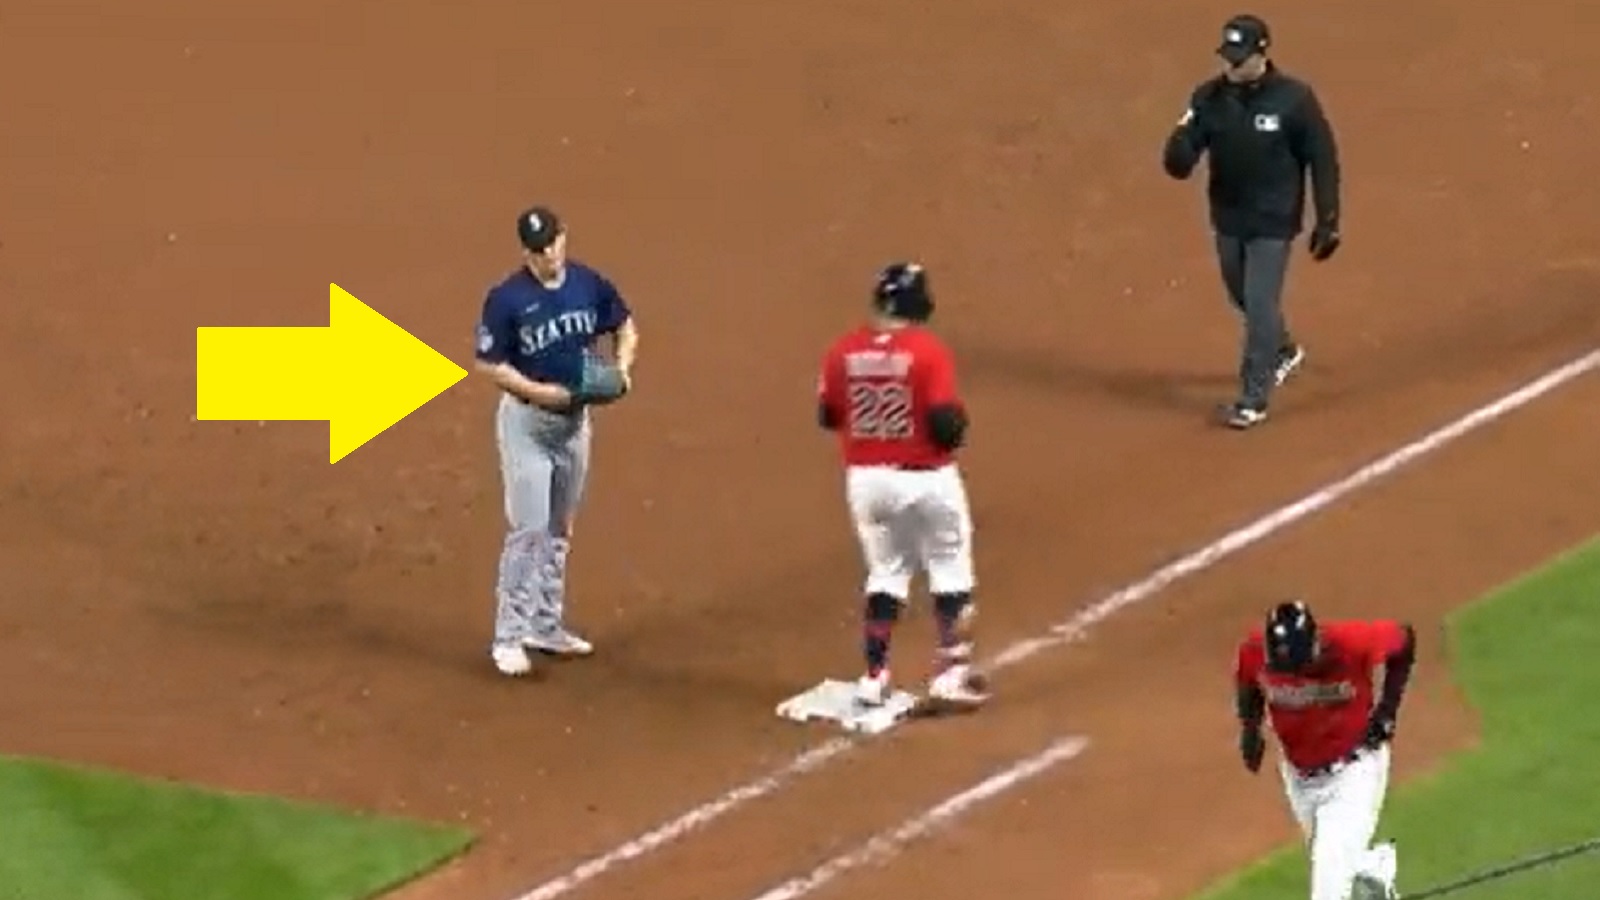 Mariners reliever trolled Josh Naylor with rock the baby move